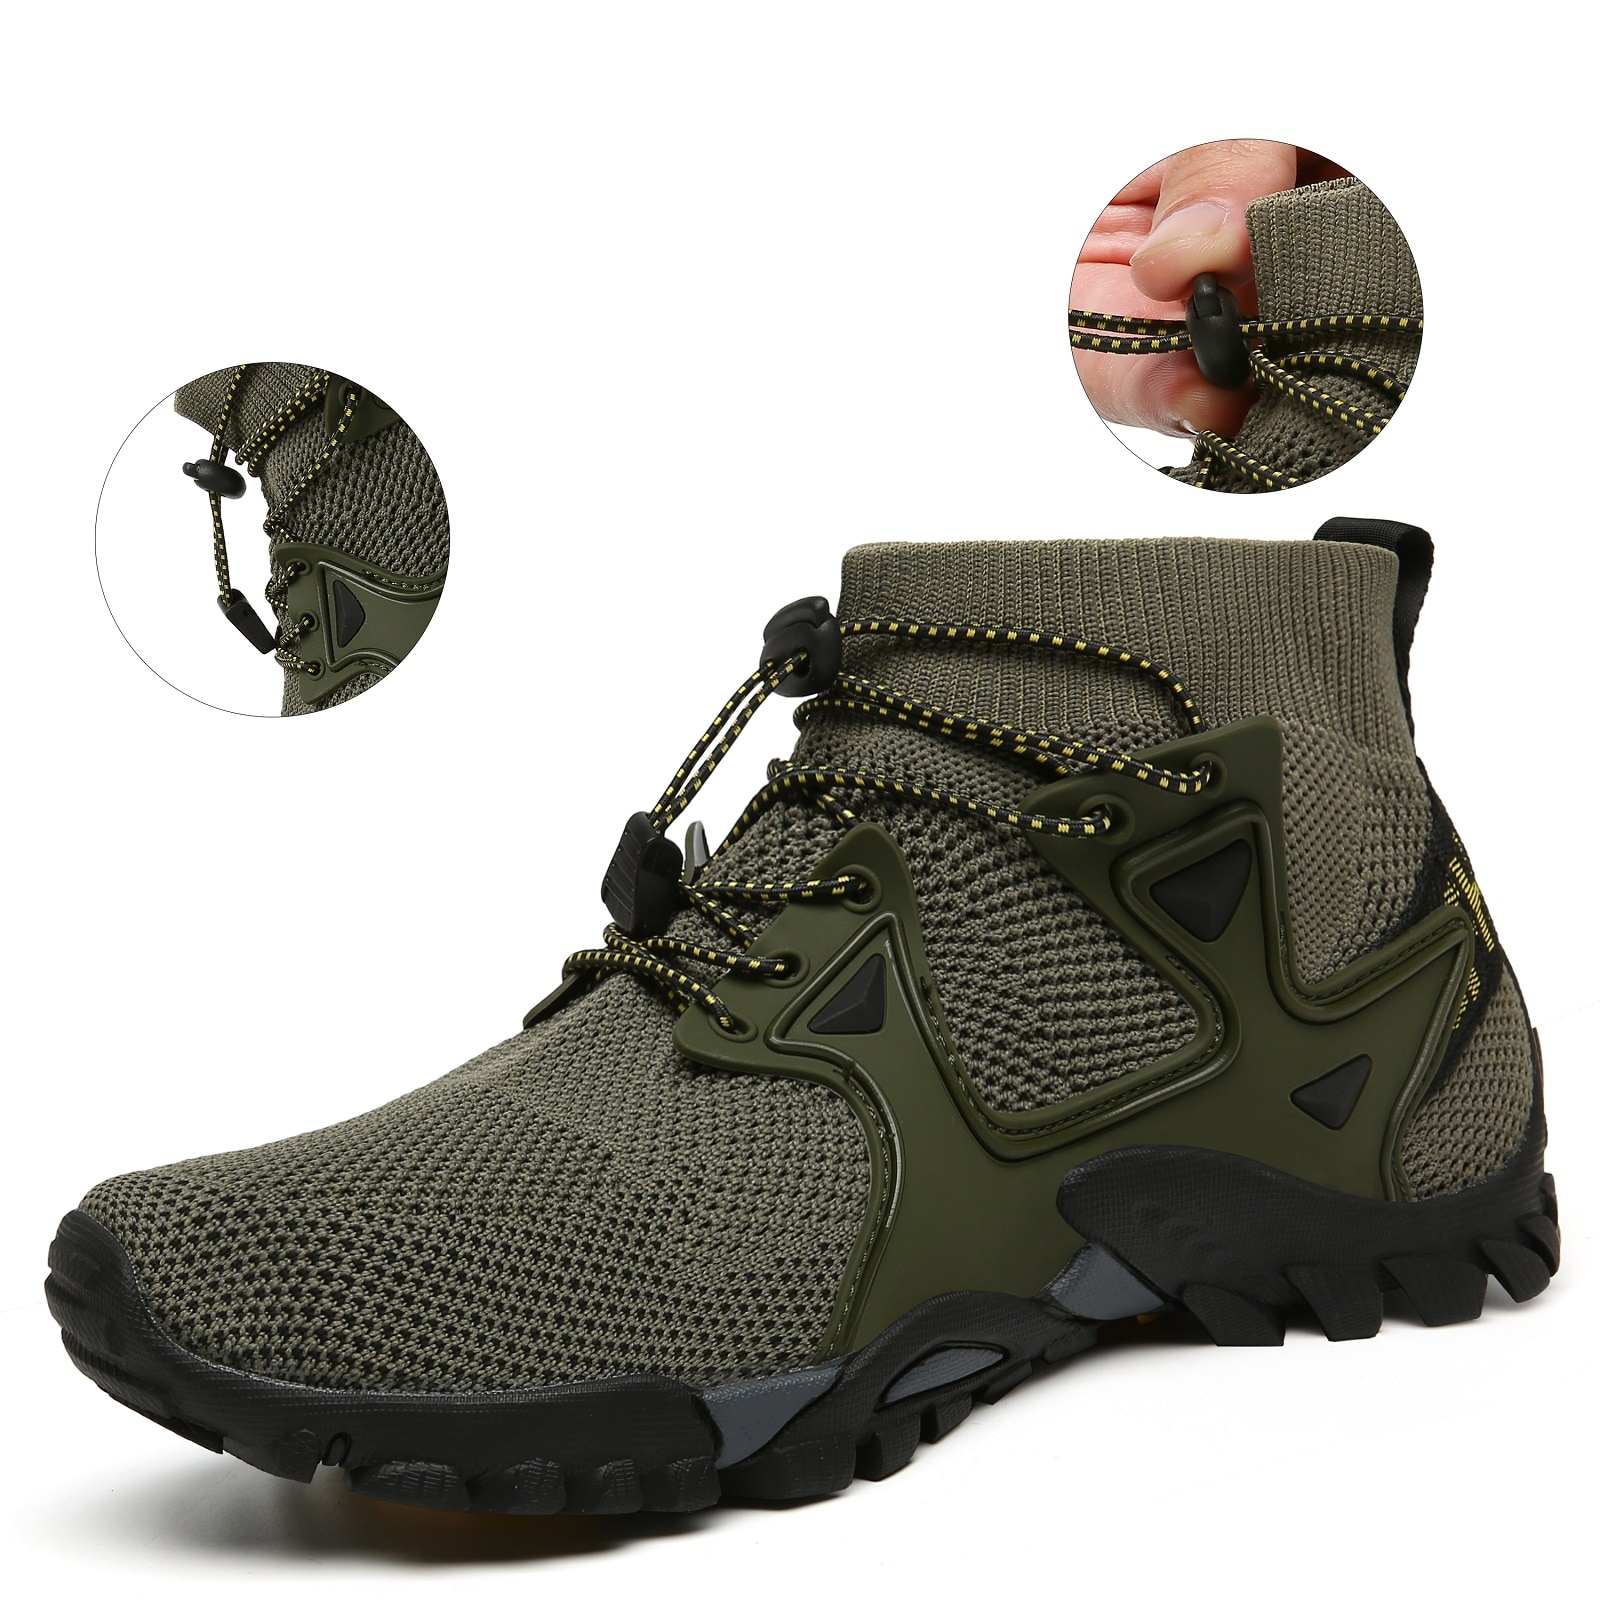 Men's Professional Outdoor Camping Men's Boots Best Fishing Water Shoes Hiking Shoes Wading Shoes Breathable Non-Slip Sneakers